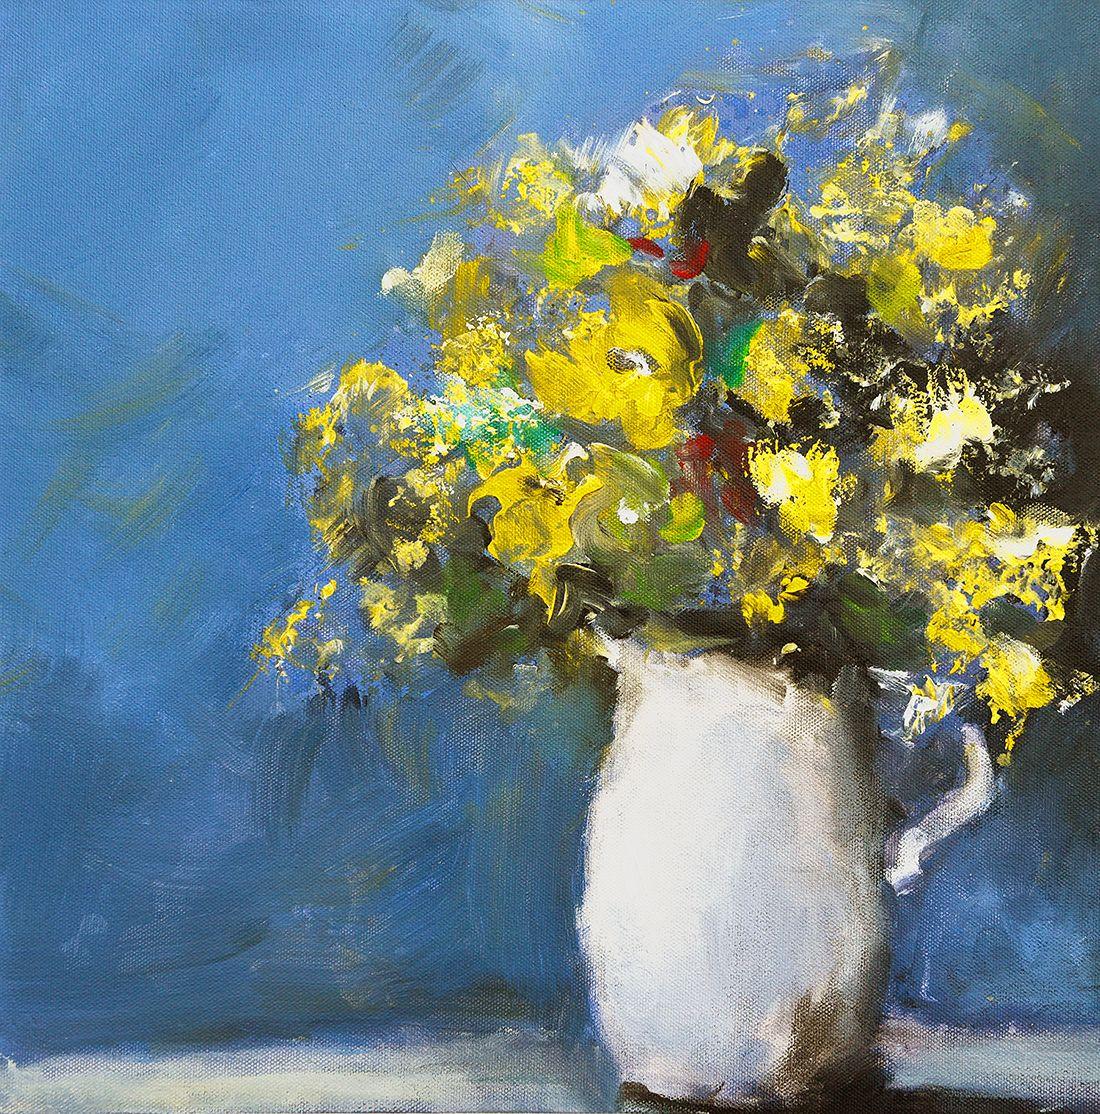 Flowers in White Pitcher, Painting, Acrylic on Canvas